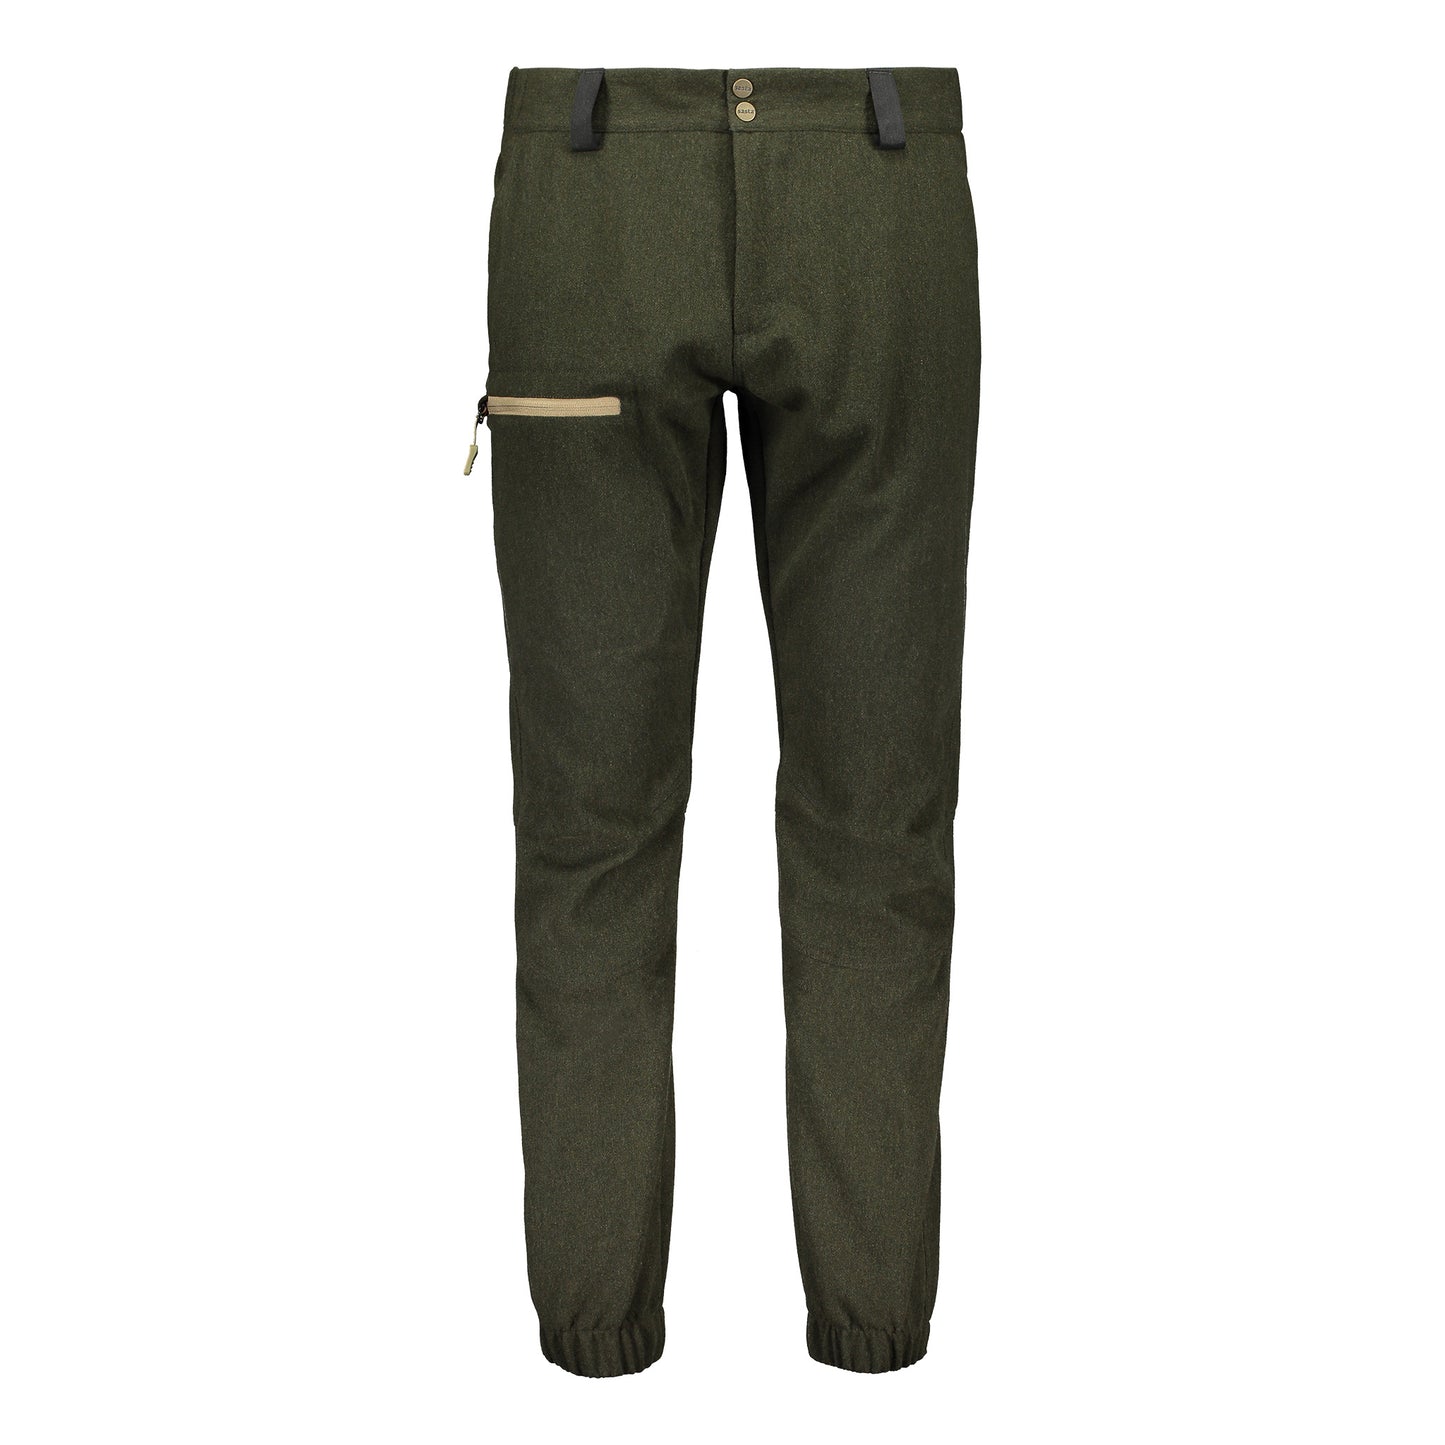 Tuohi trousers